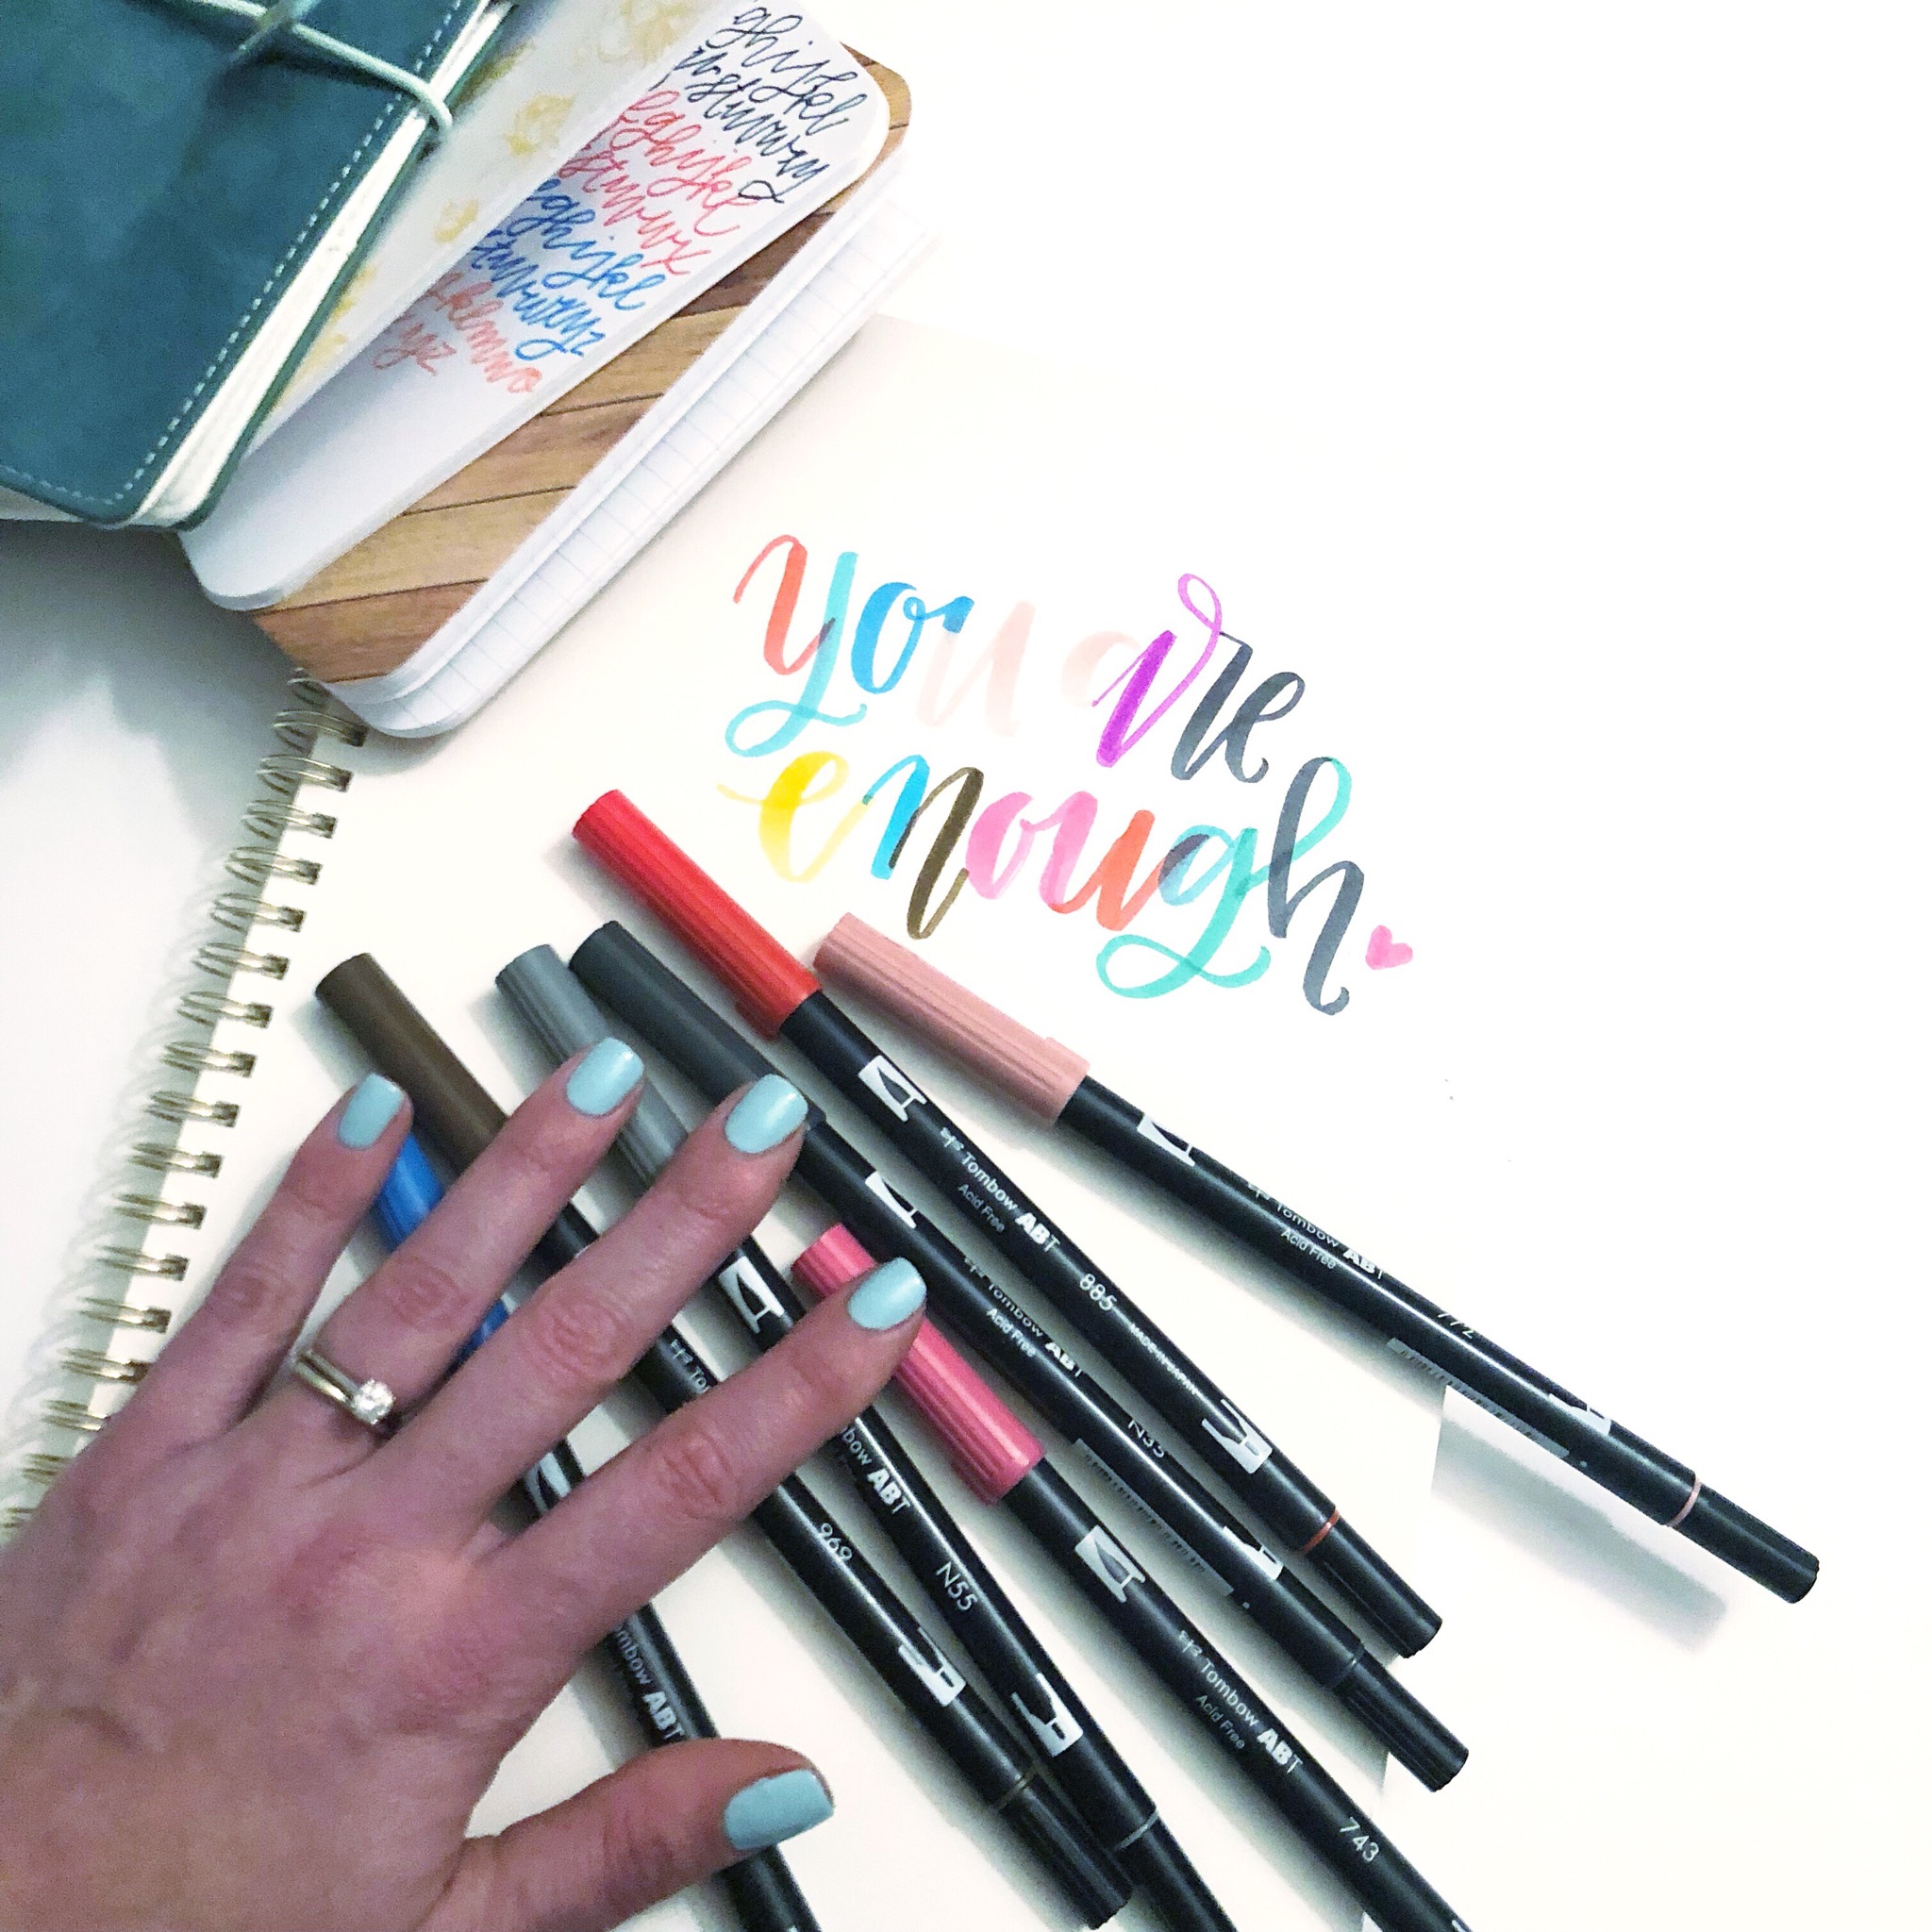 Lauren Fitzmaurice of @renmadecalligraphy shows you 5 fun ways to practice lettering using products from Tombow USA and Webster's Pages.